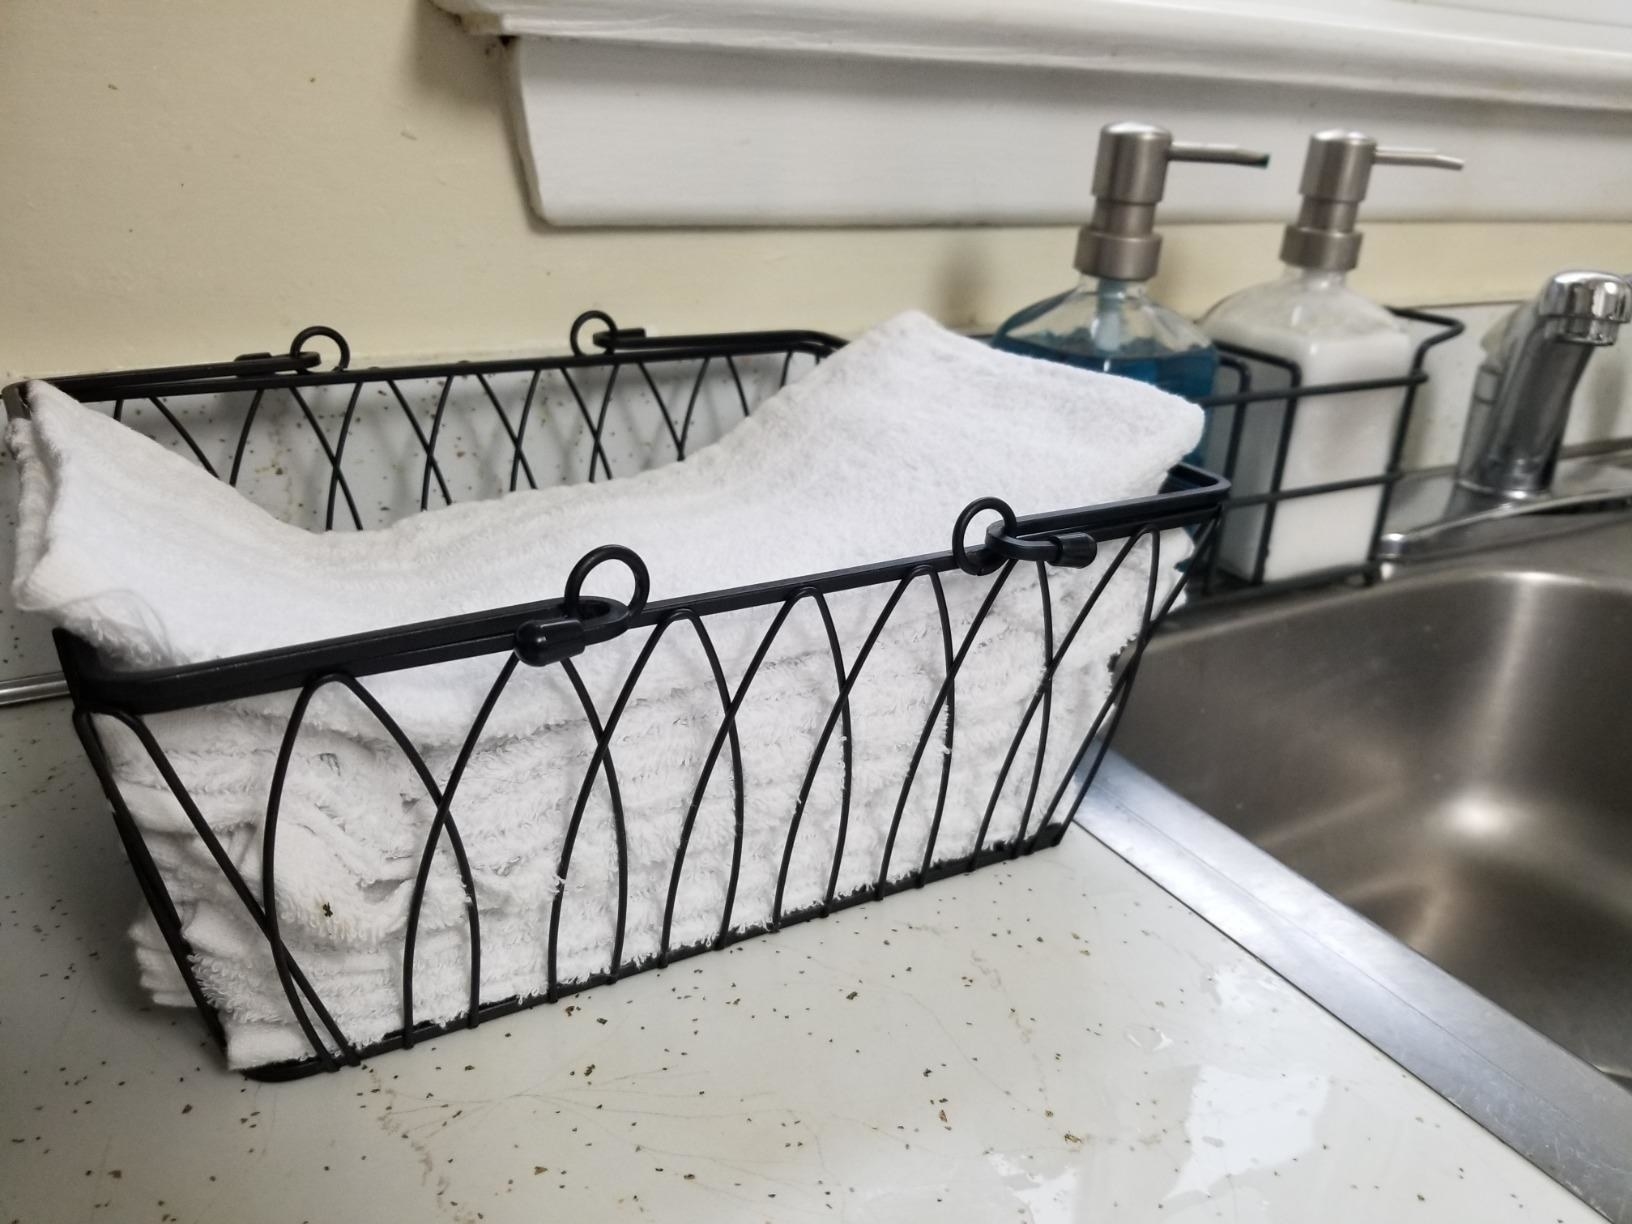 Reviewer pic of the wire basket with handles filled with hand towels next to a sink